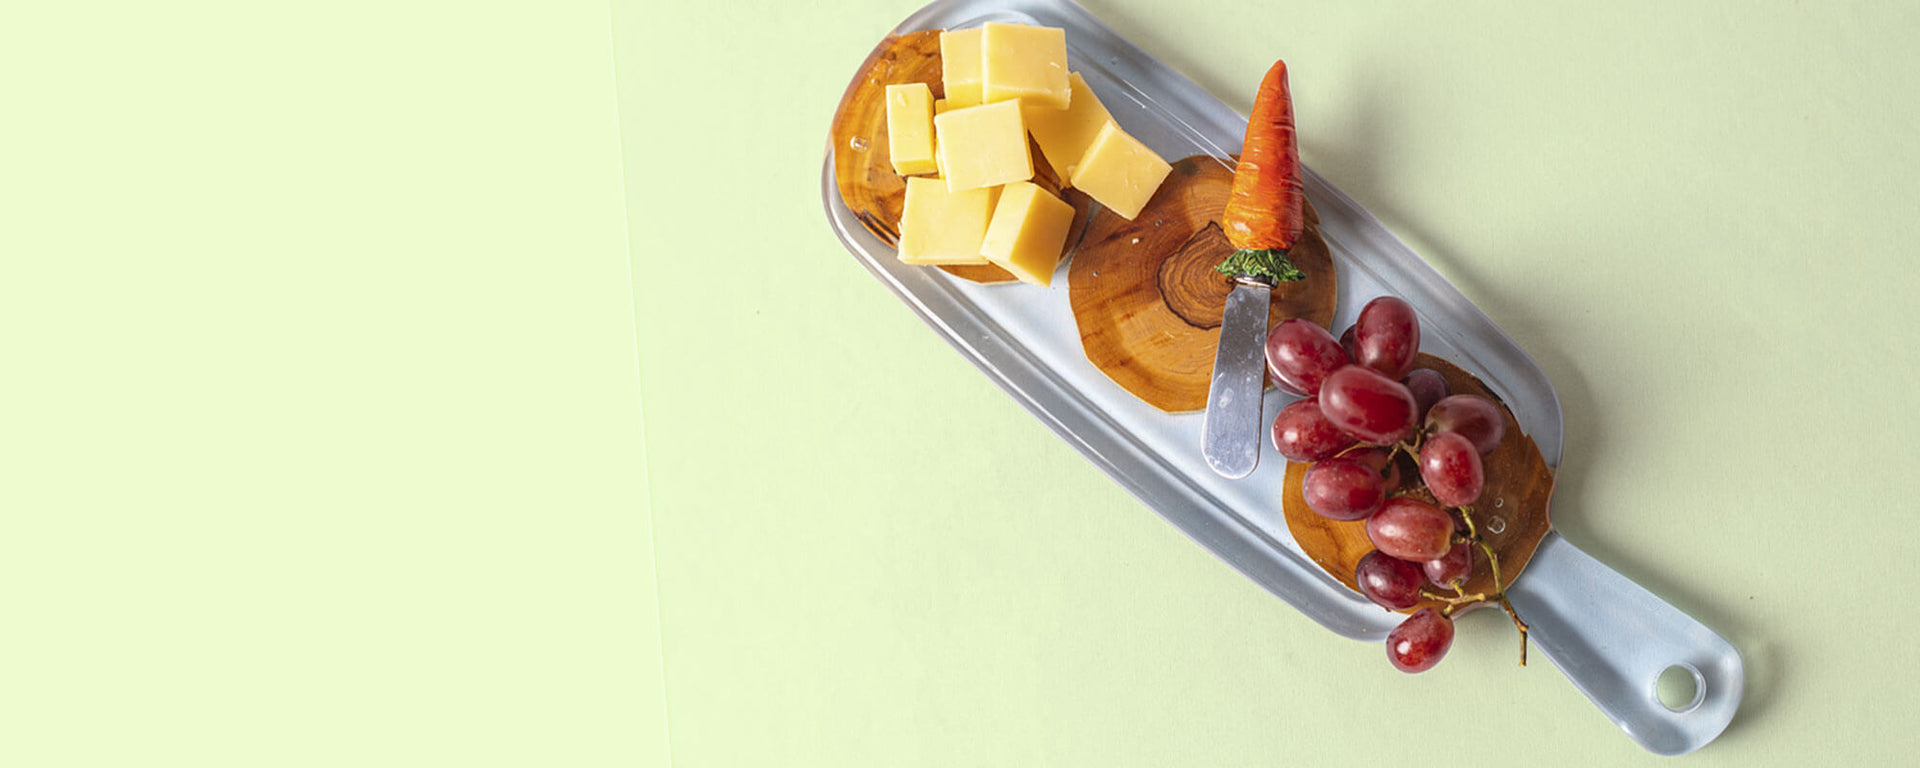 Food on a resin serving board